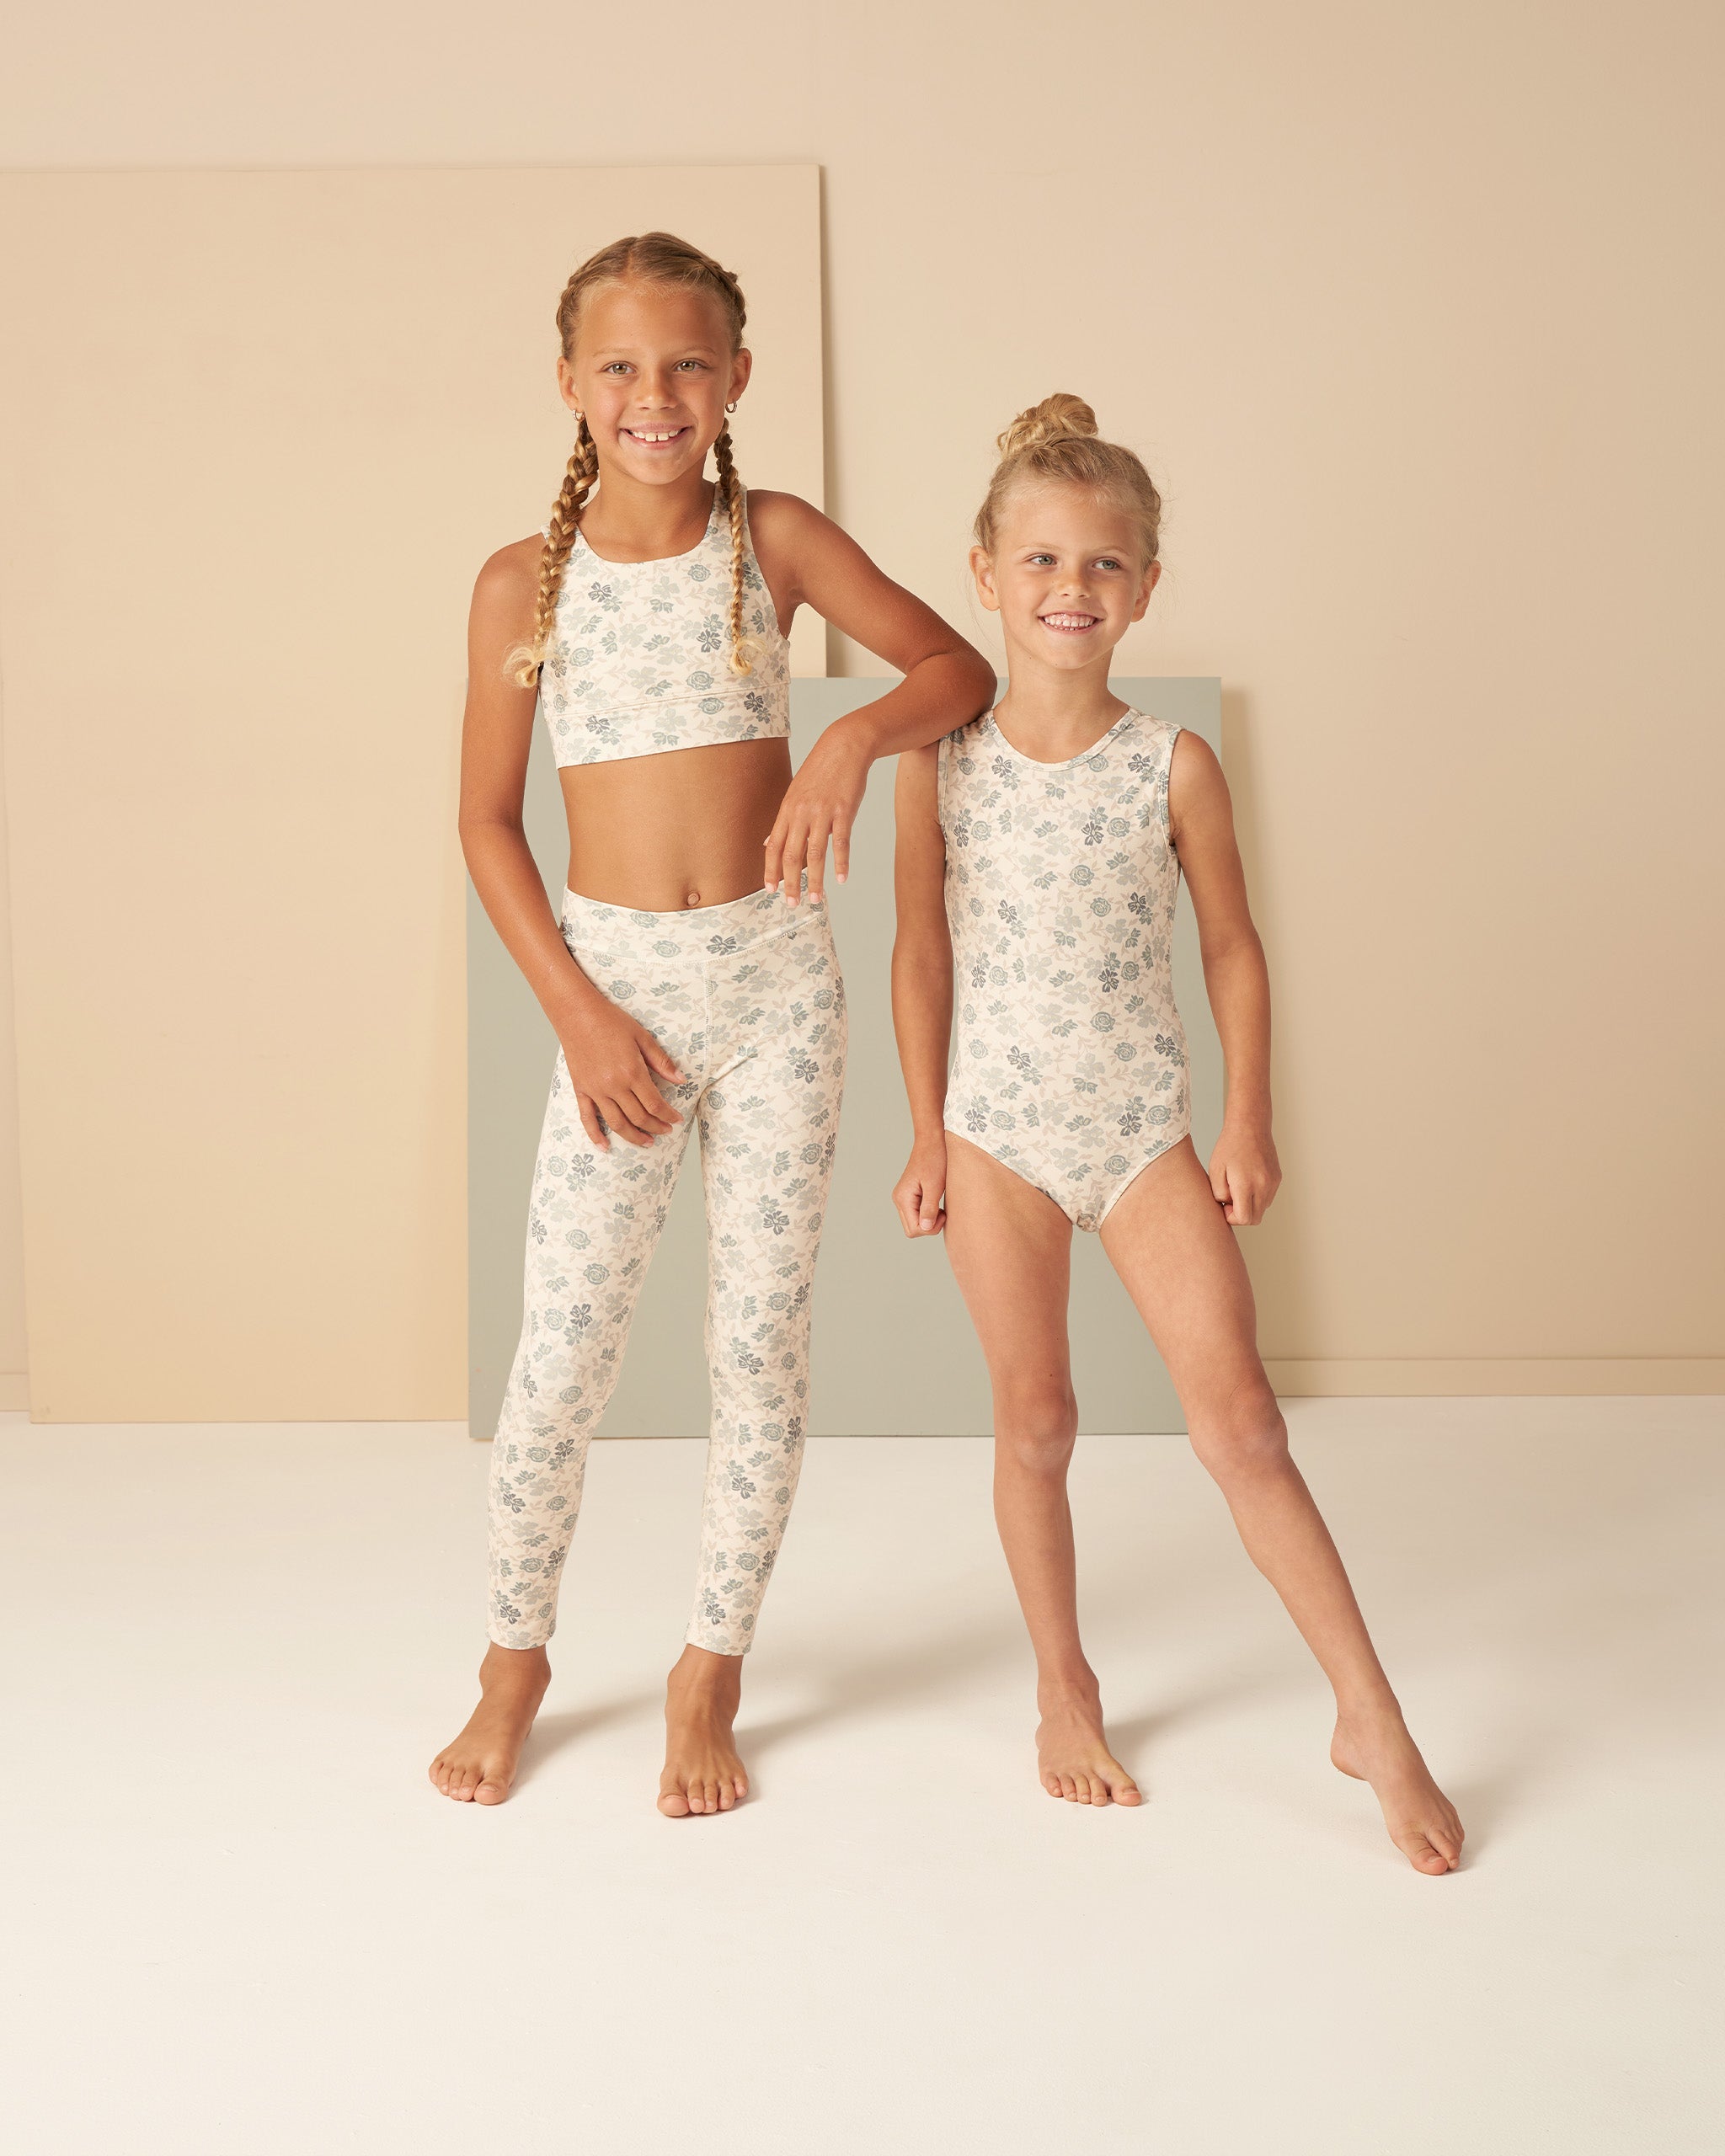 Basic Leotard || Blue Floral - Rylee + Cru | Kids Clothes | Trendy Baby Clothes | Modern Infant Outfits |